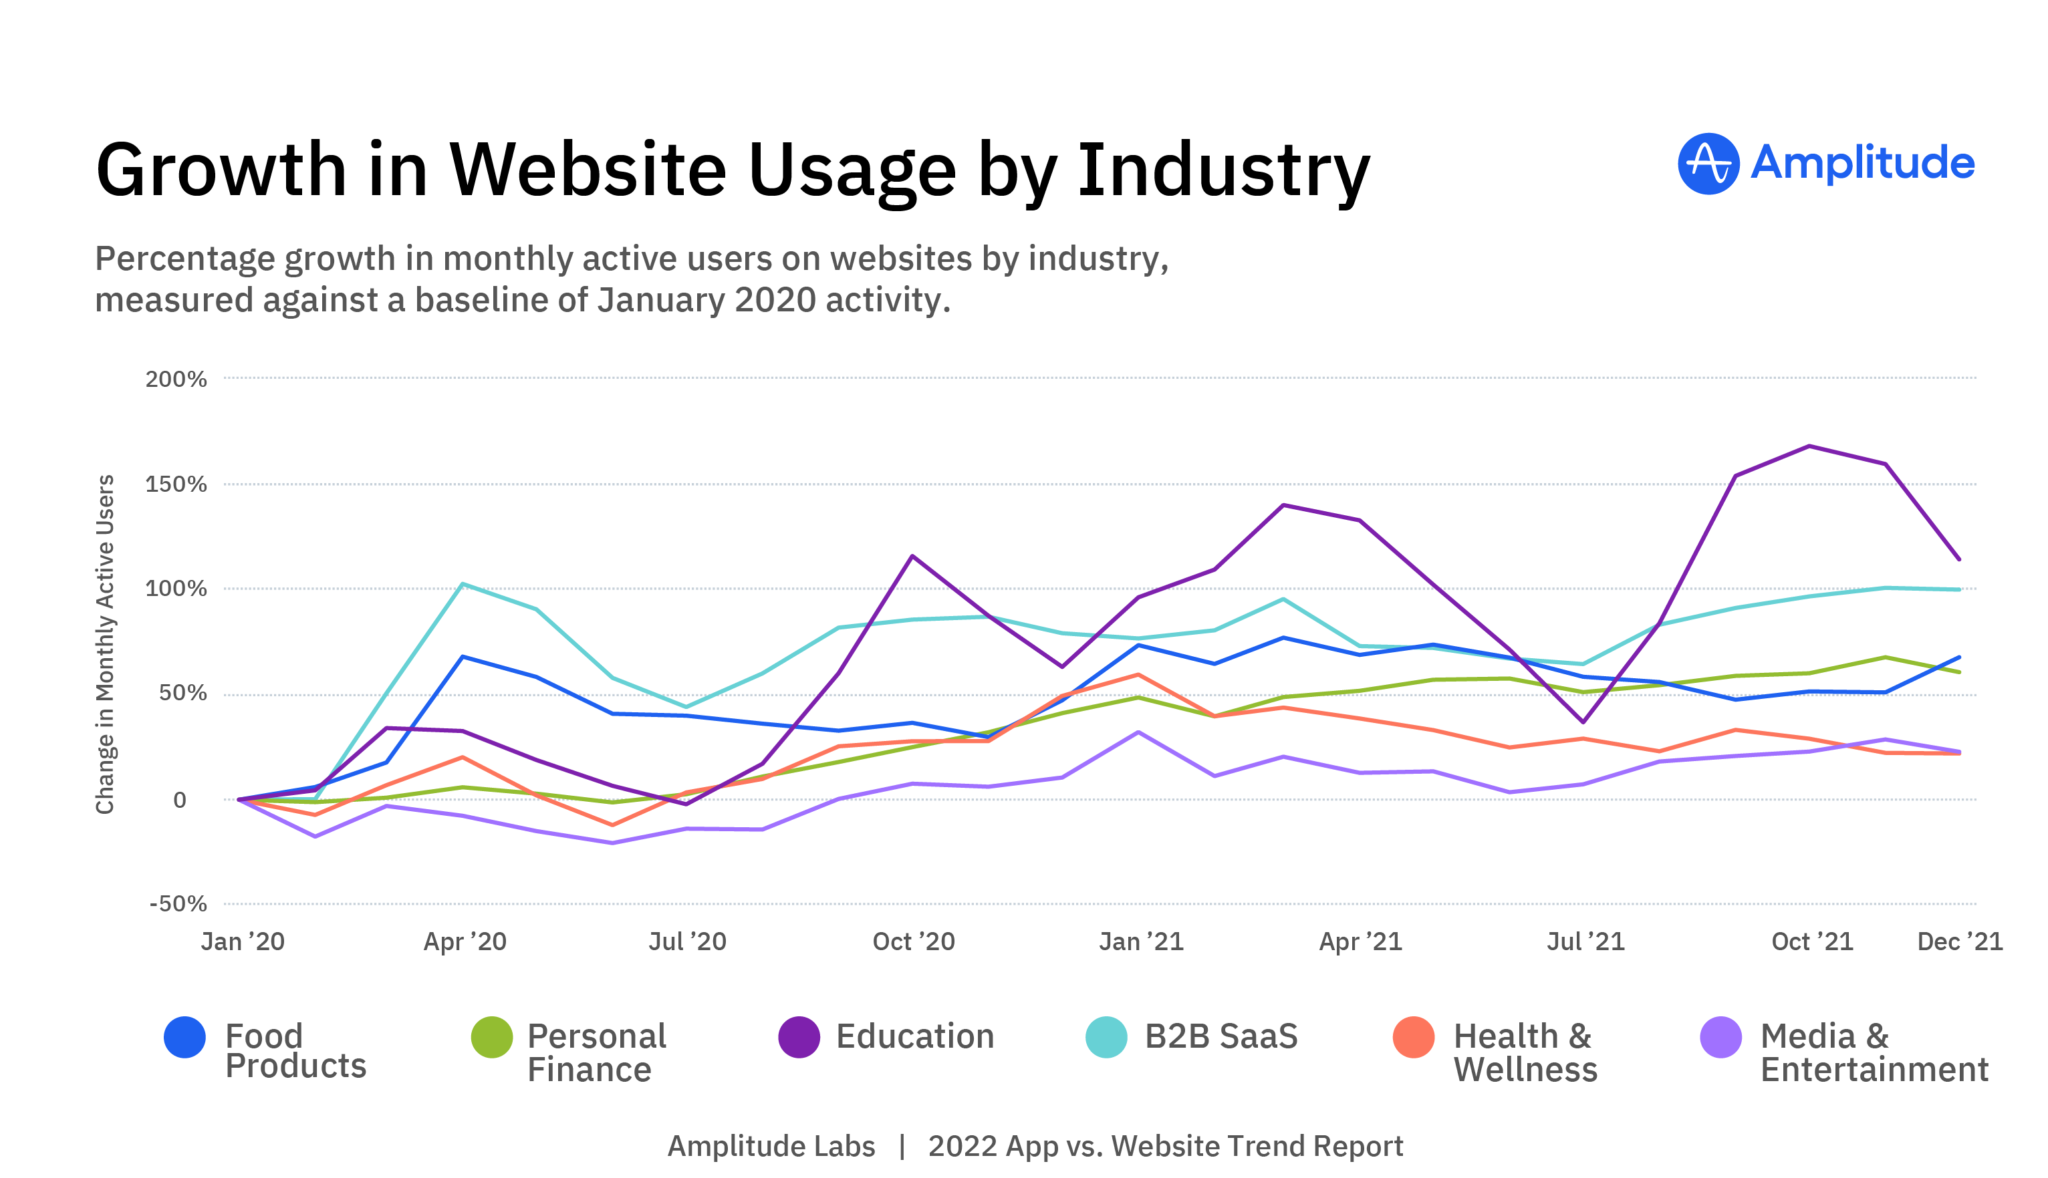 Growth in website usage by industry